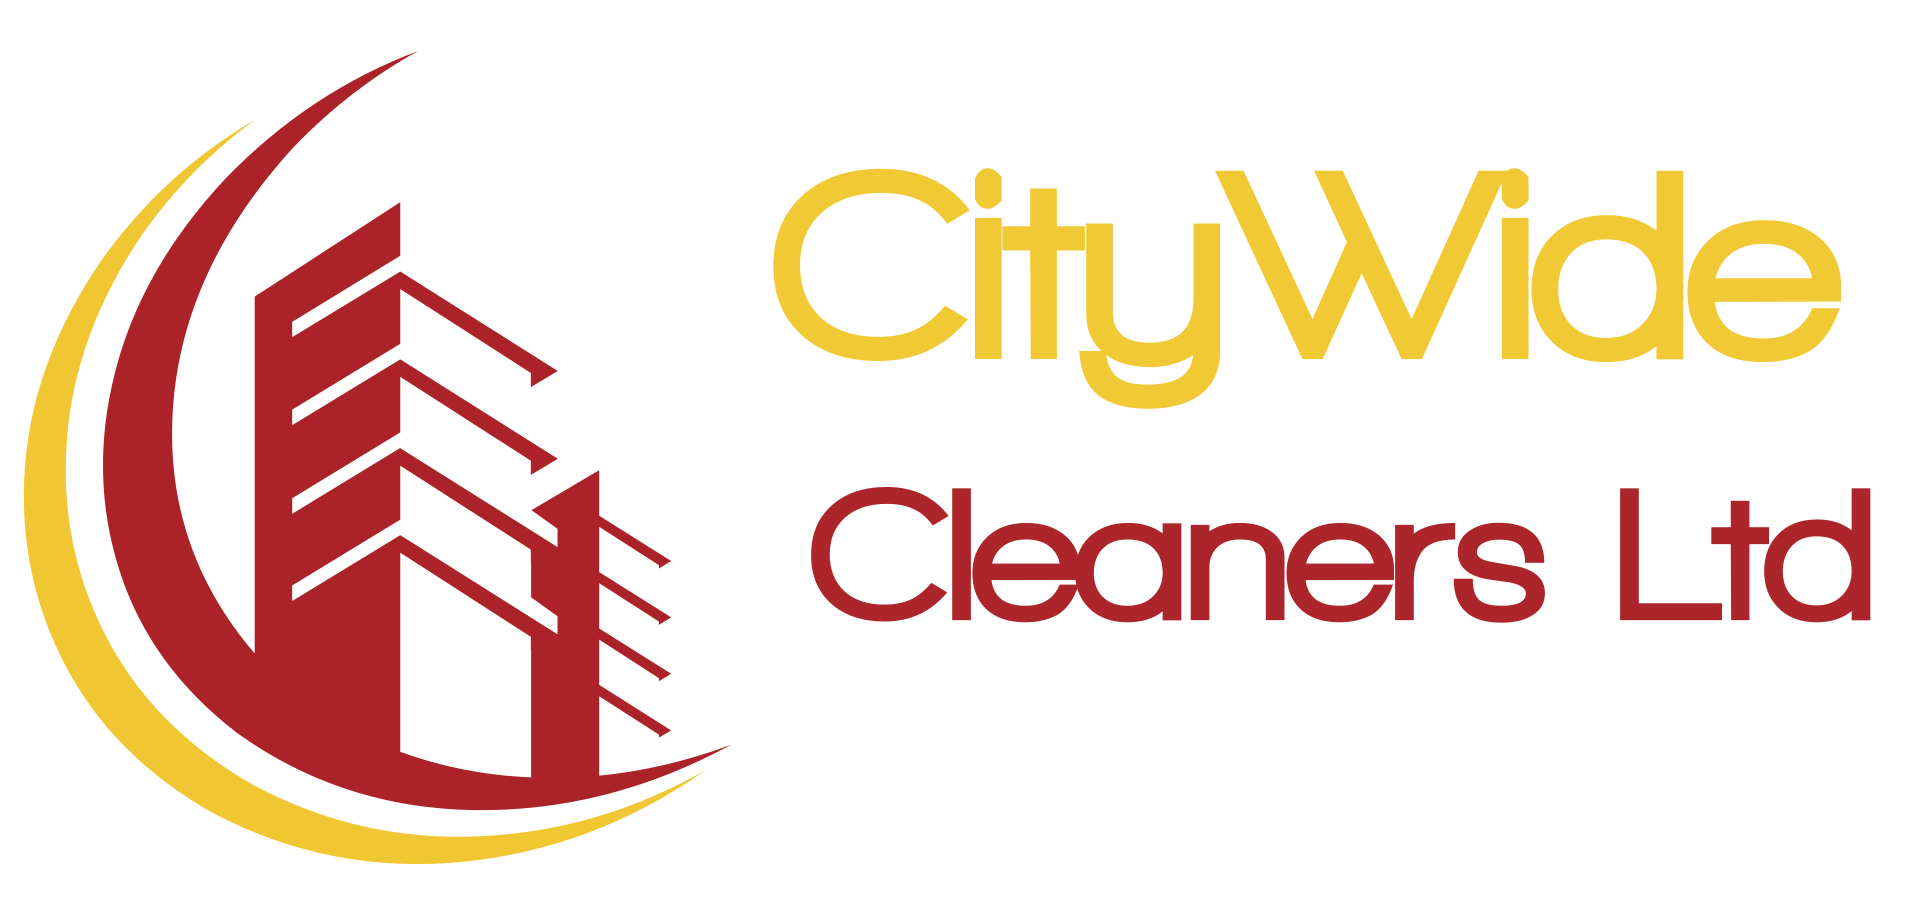 CityWide Cleaners